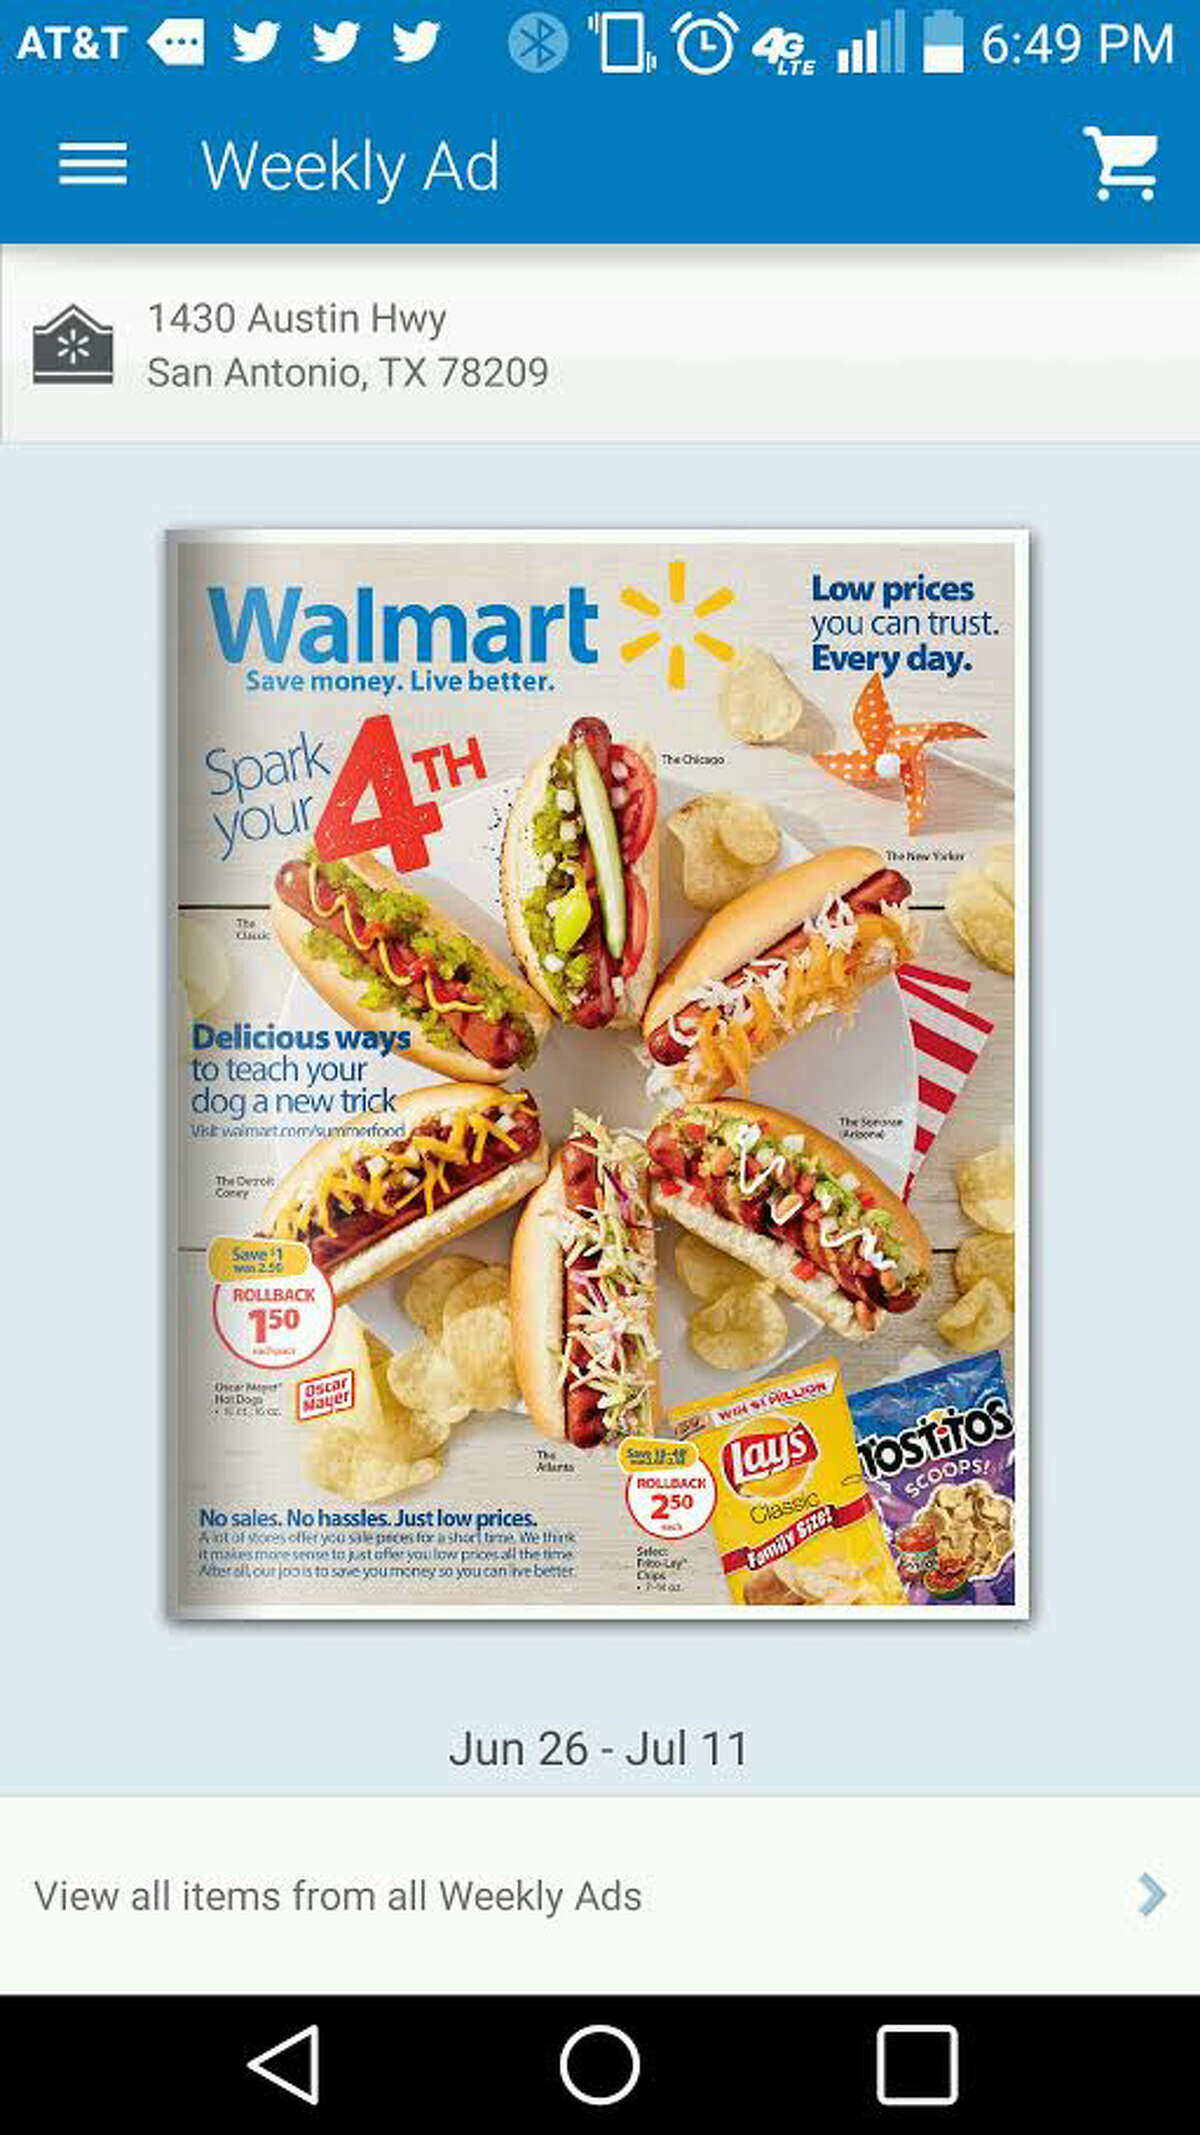 Walmart's smartphone app includes, among other things, weekly ads and a “Search My Store” feature that allows shoppers to track the exact location of any item in a store or order it online if it’s not available at that location.